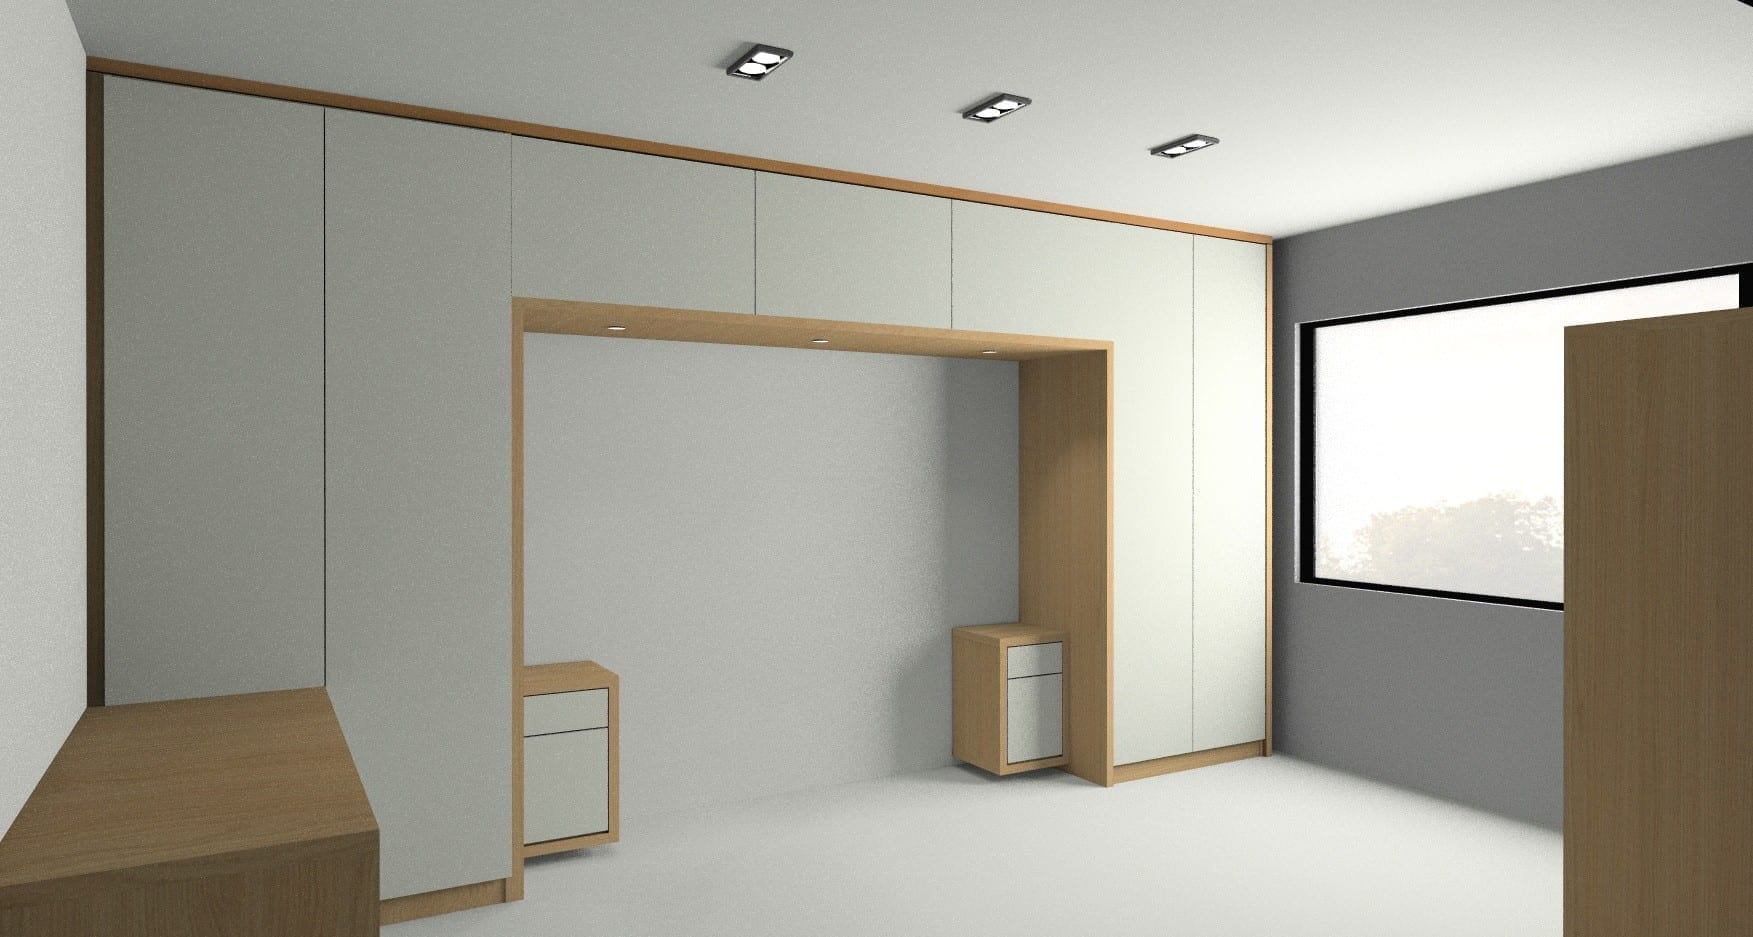 Rendered image which was part of the bespoke modern style bedroom furniture.